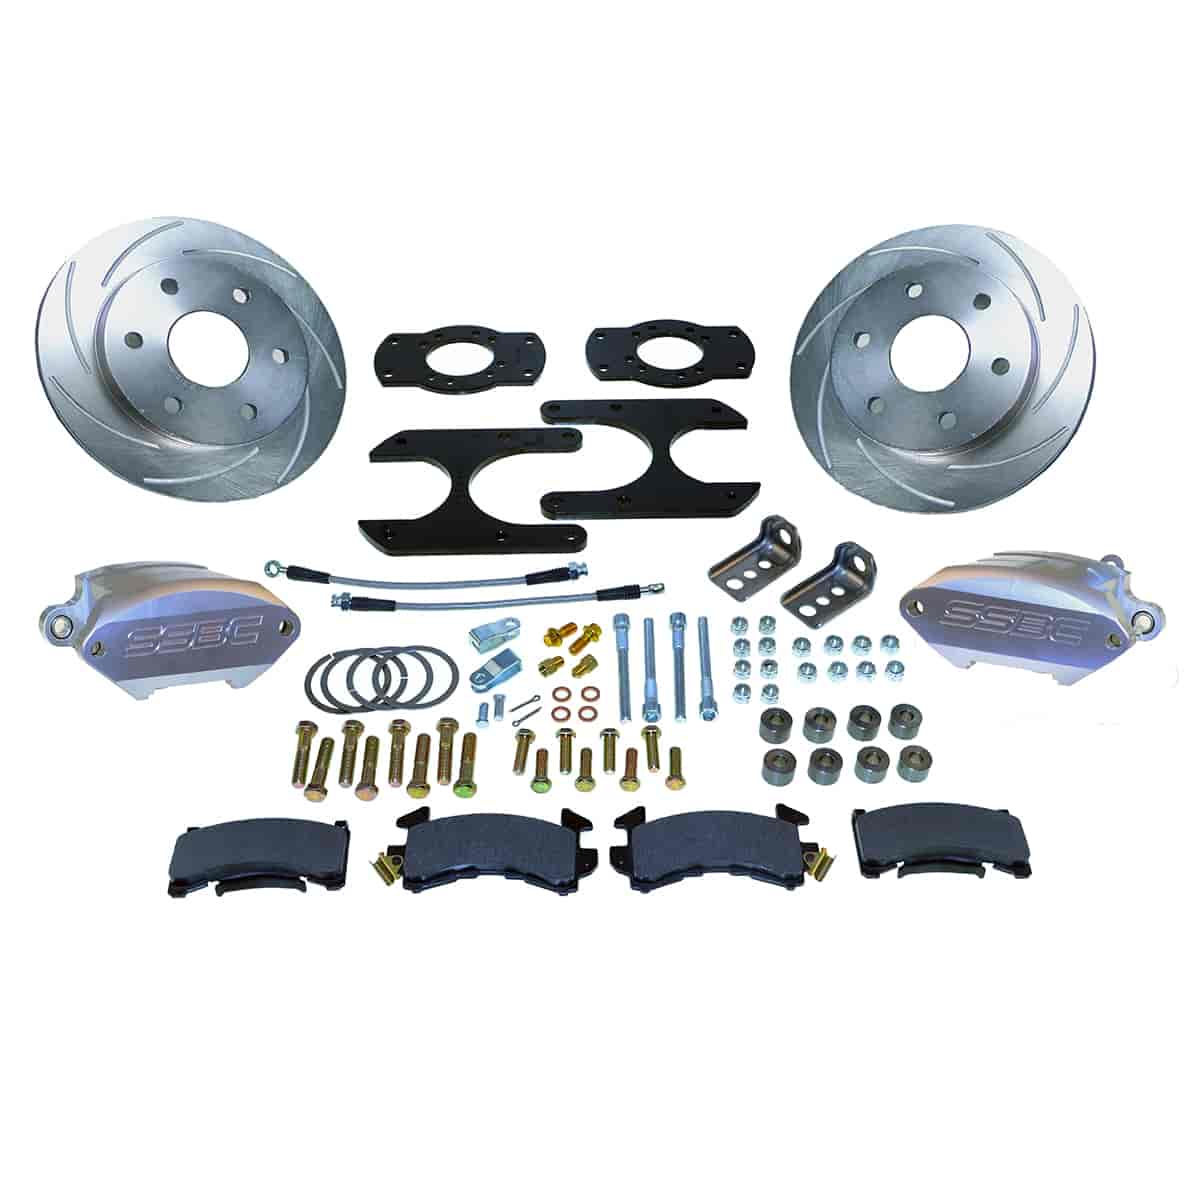 Sport R1 Rear Disc Brake Conversion Kit For Chevy 8.5" 10 bolt and 12 bolt